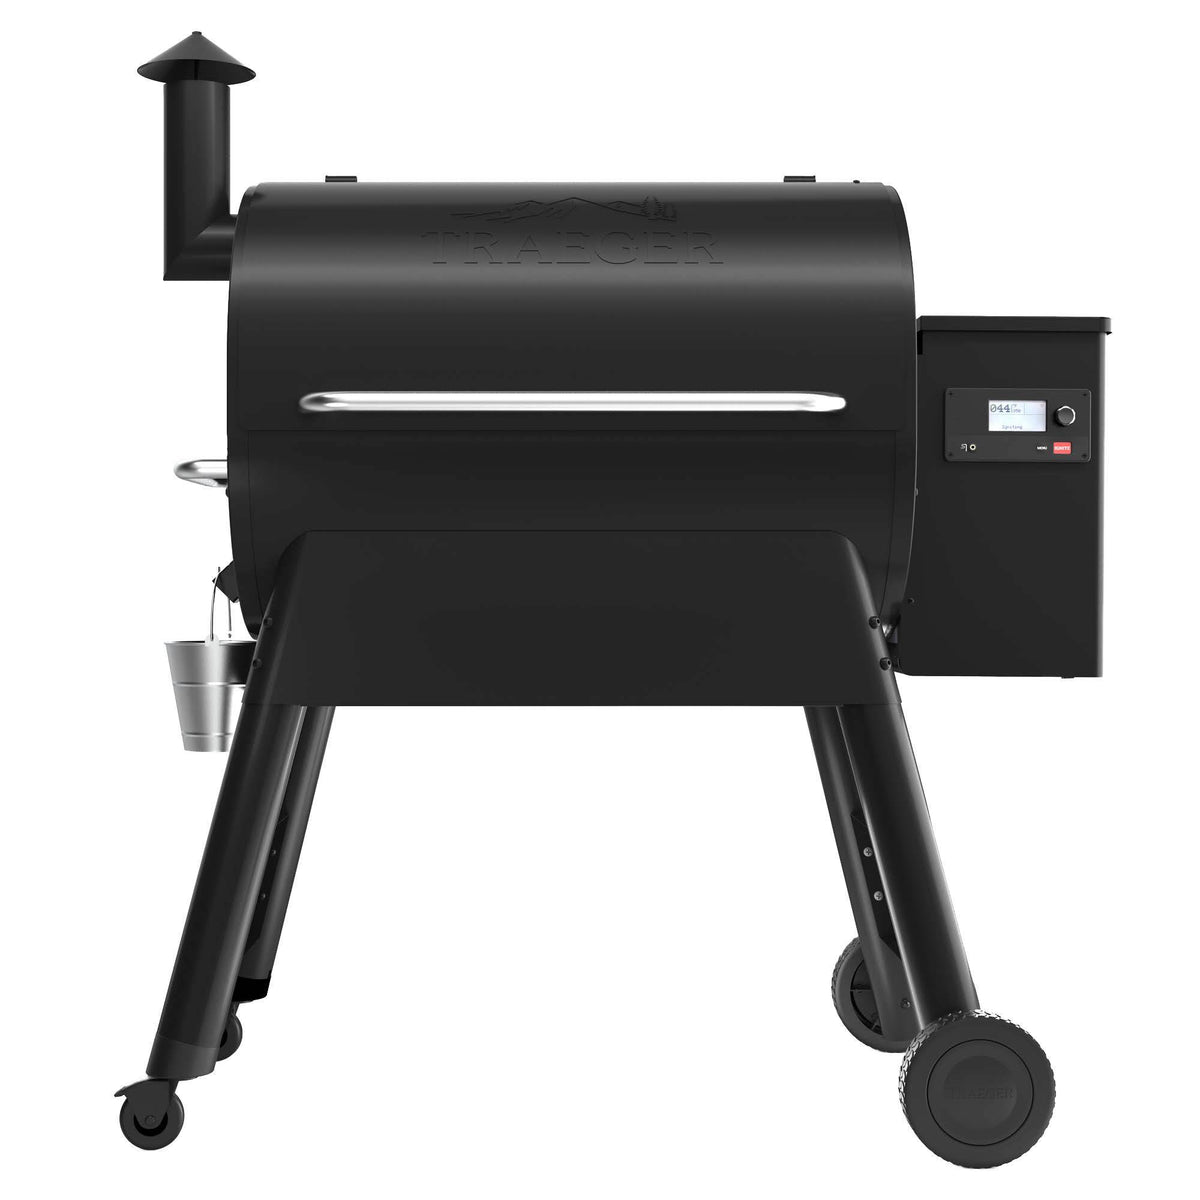 Traeger Grills PRO 780 - Black– Bourlier's Barbecue and Fireplace